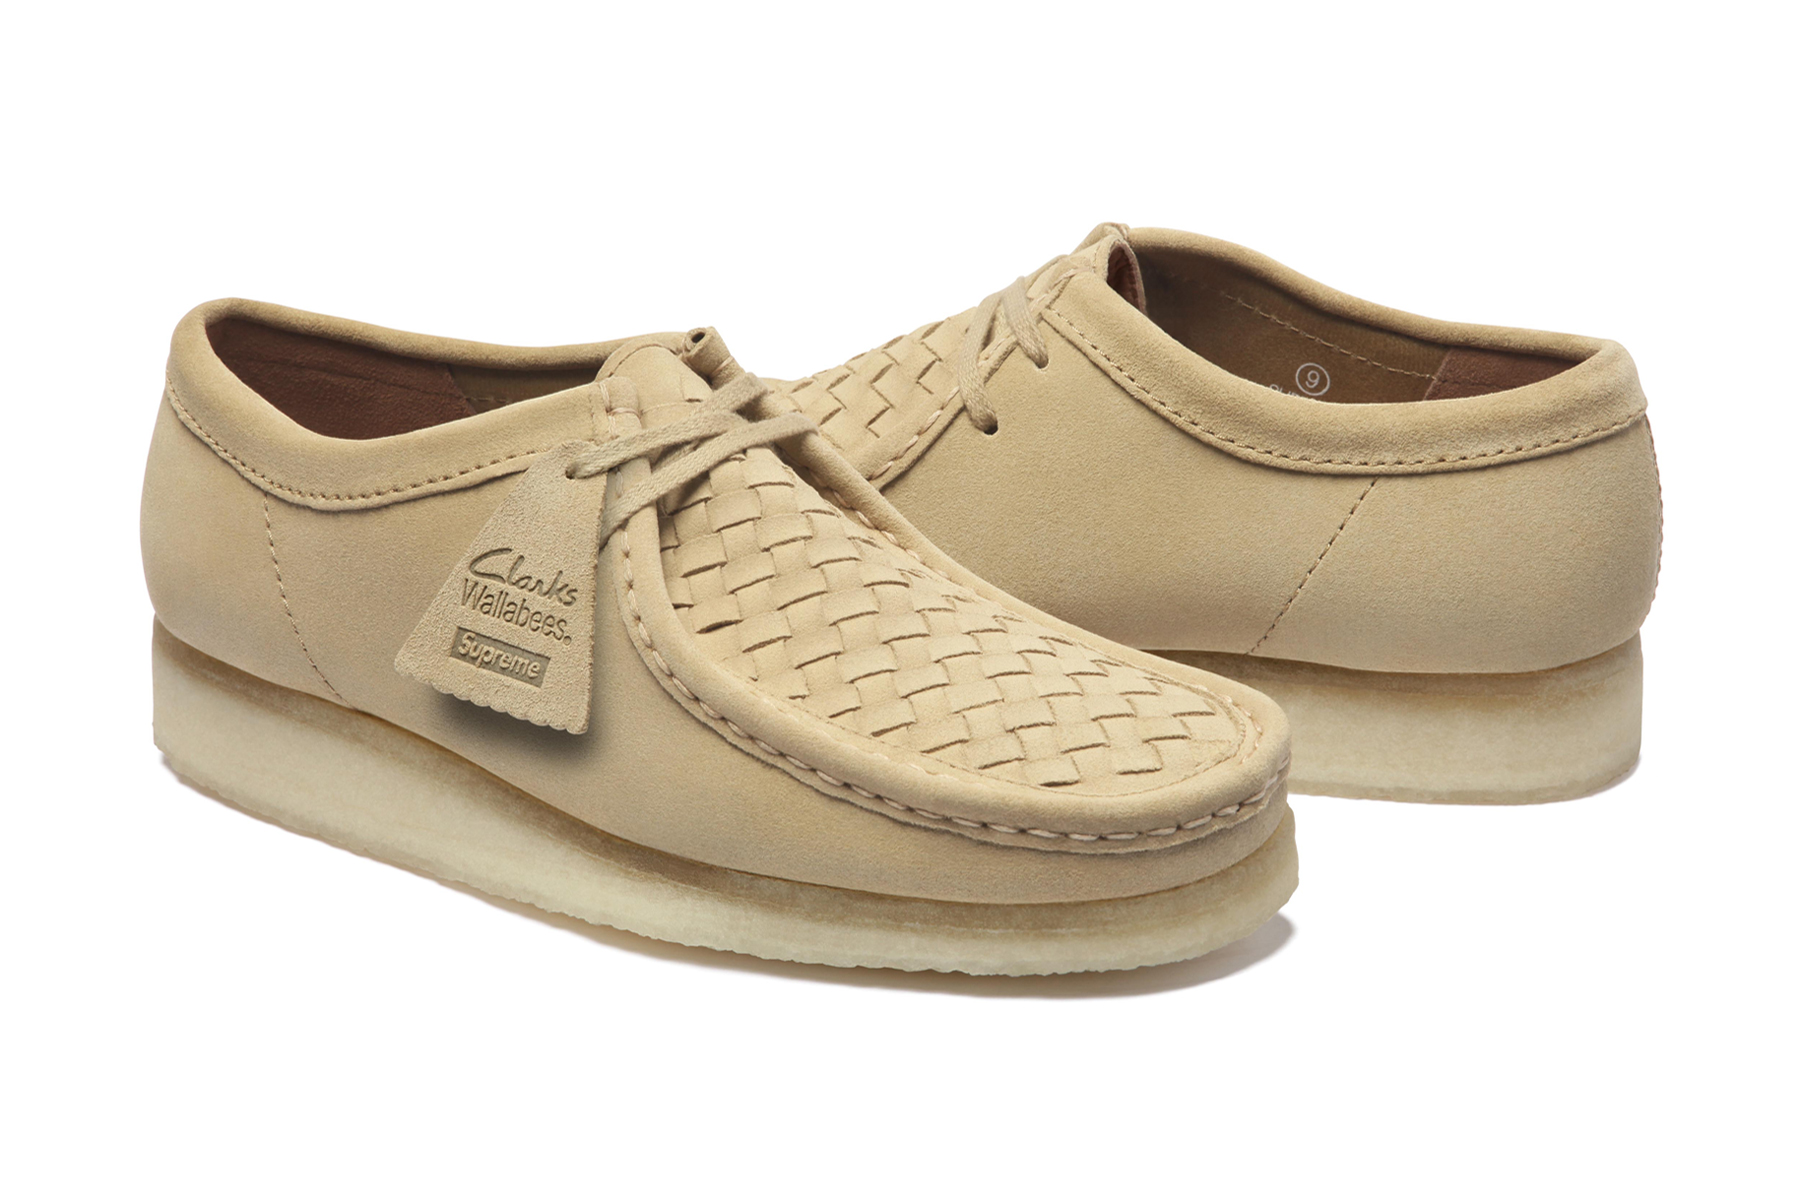 supreme-x-clarks-2016-spring-summer-collection-6